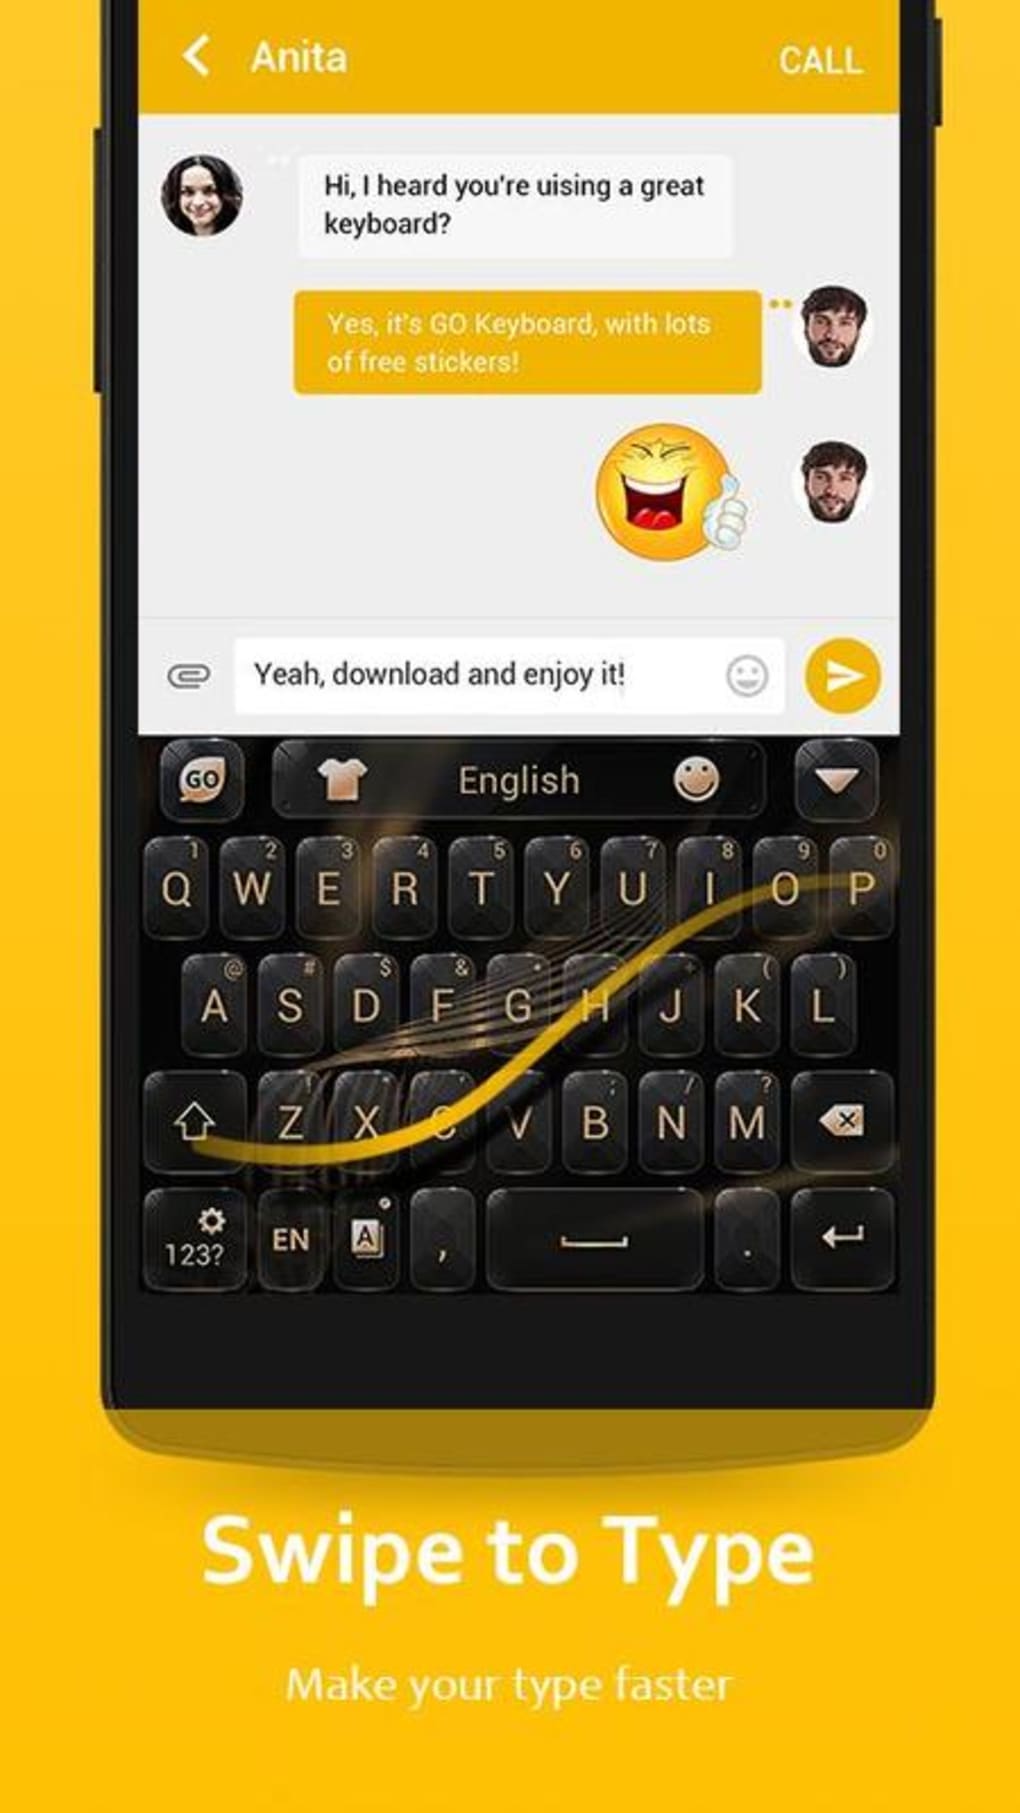 Roblox Keyboard Apk Cheat Free Fire Android Apk - roblox android keyboard